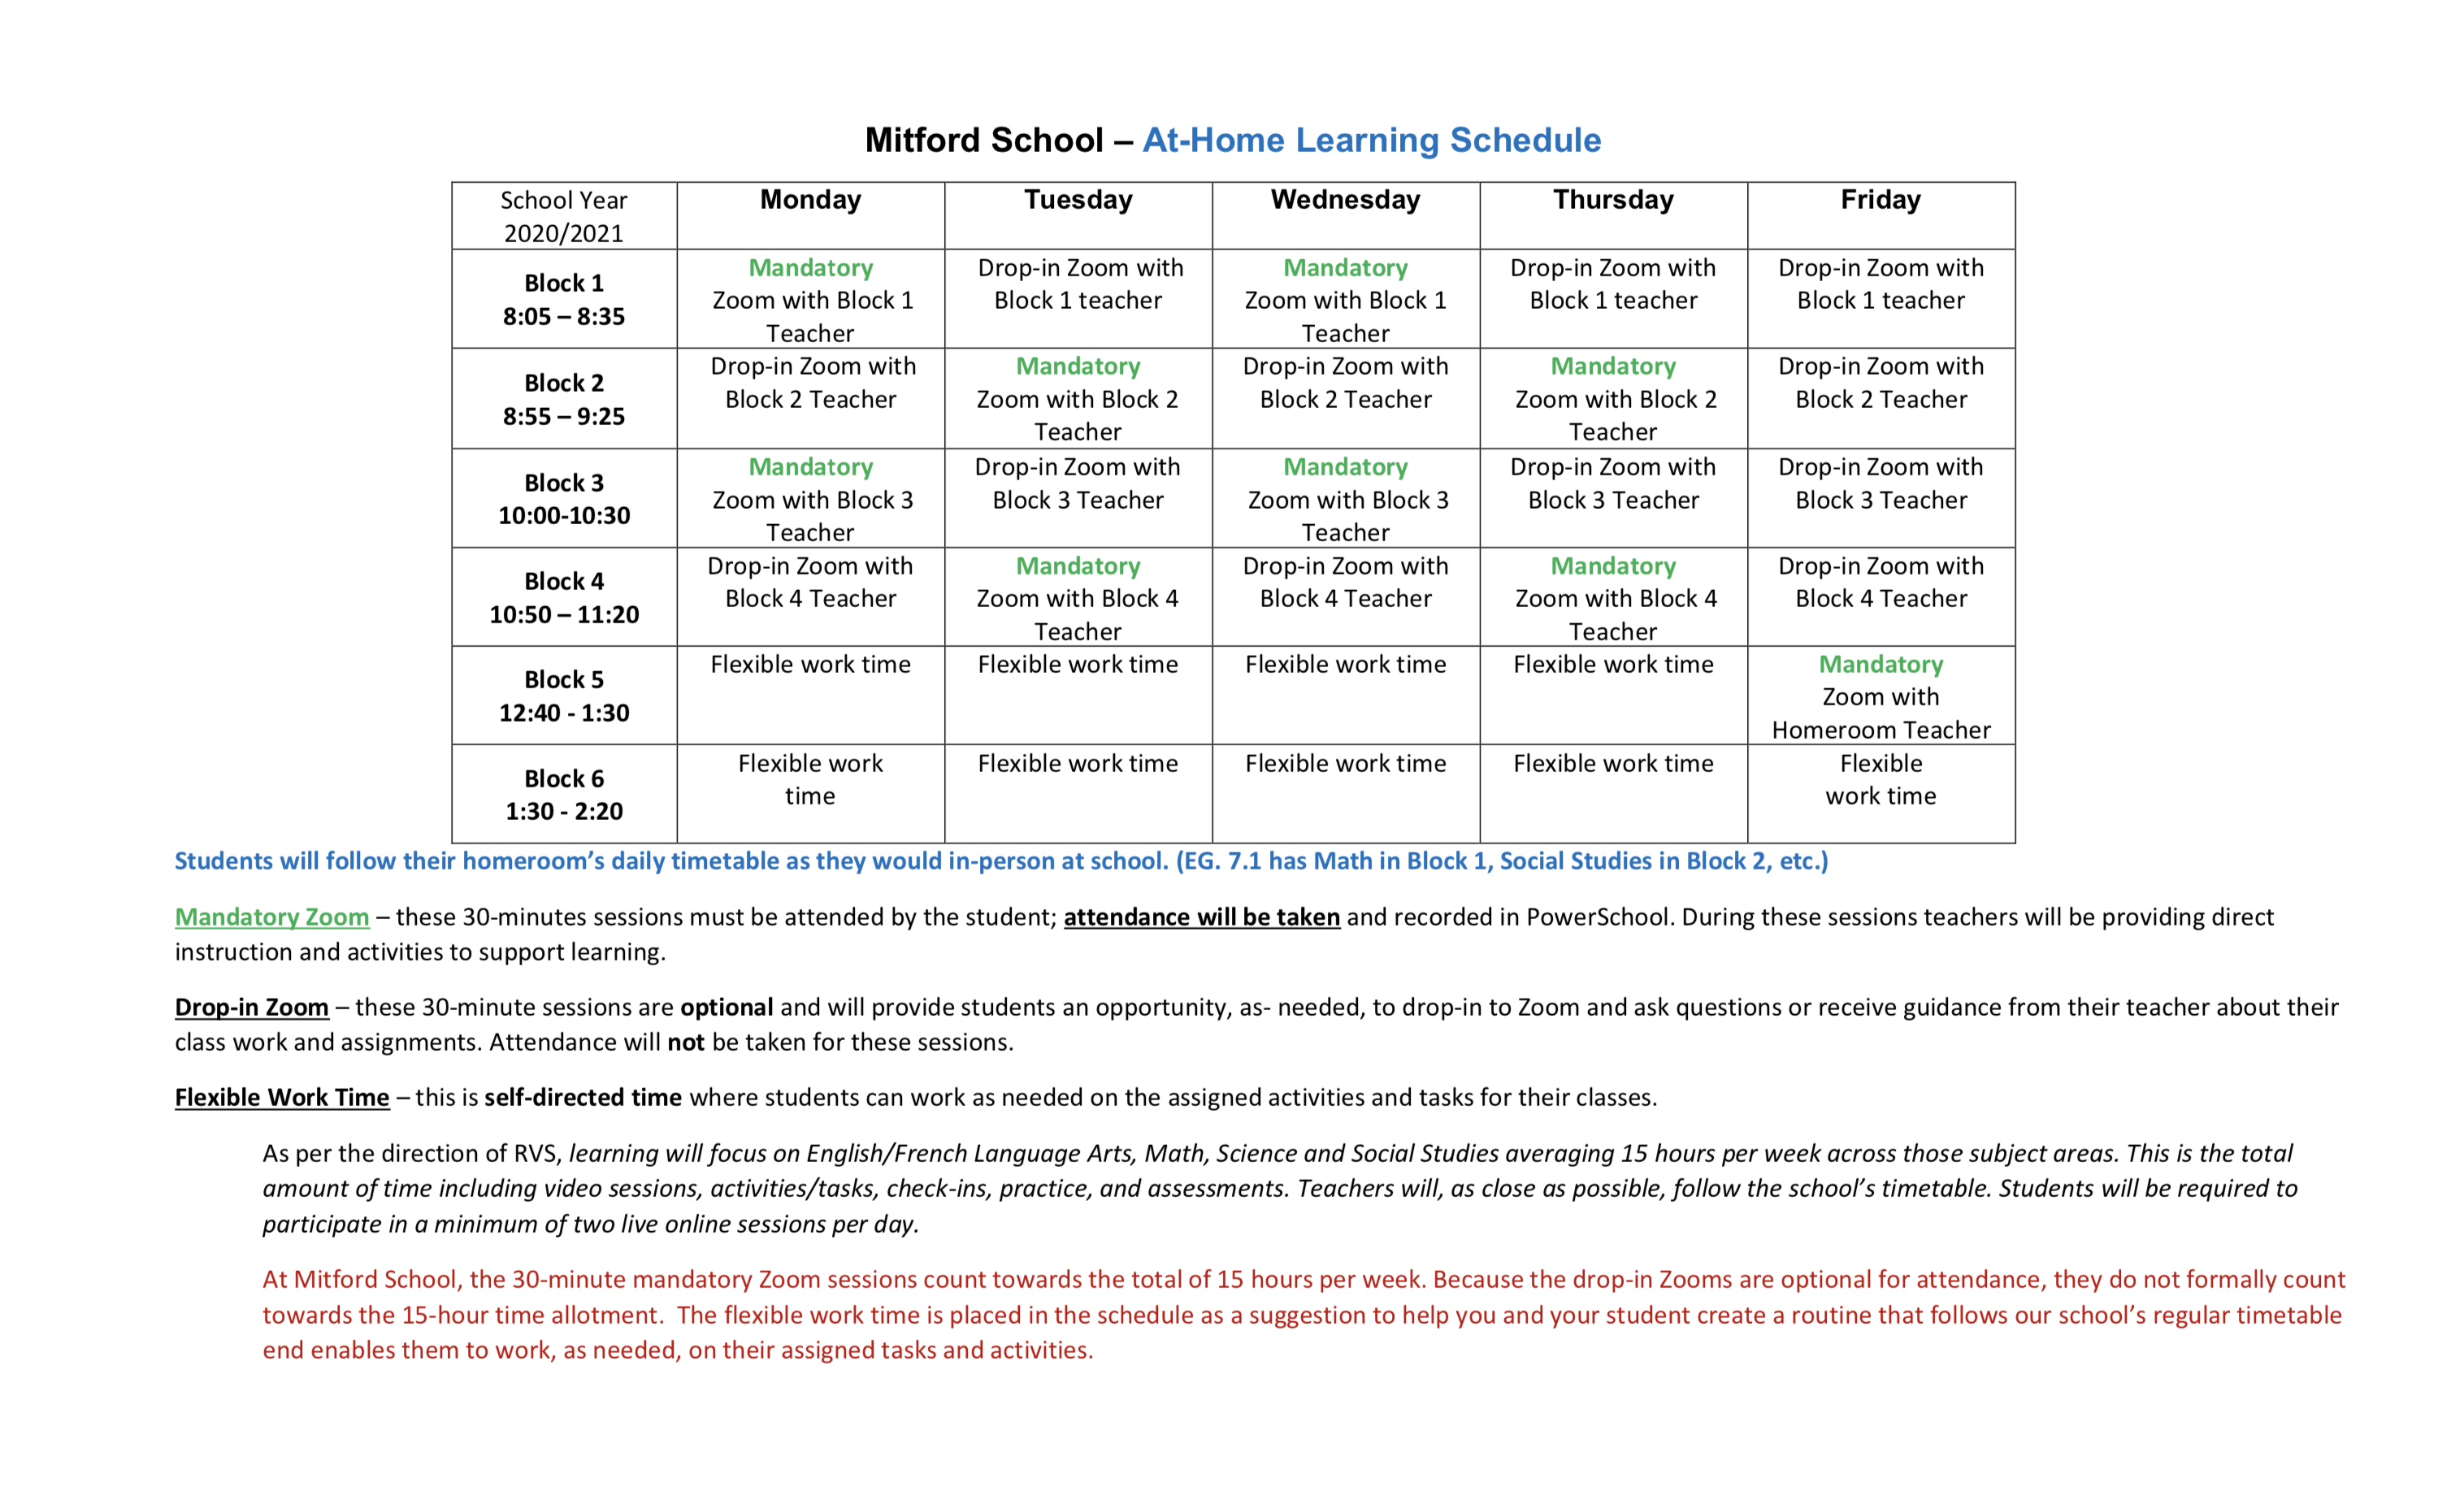 Grade 7/8 At-Home Learning Schedule and Parent/Student Guide